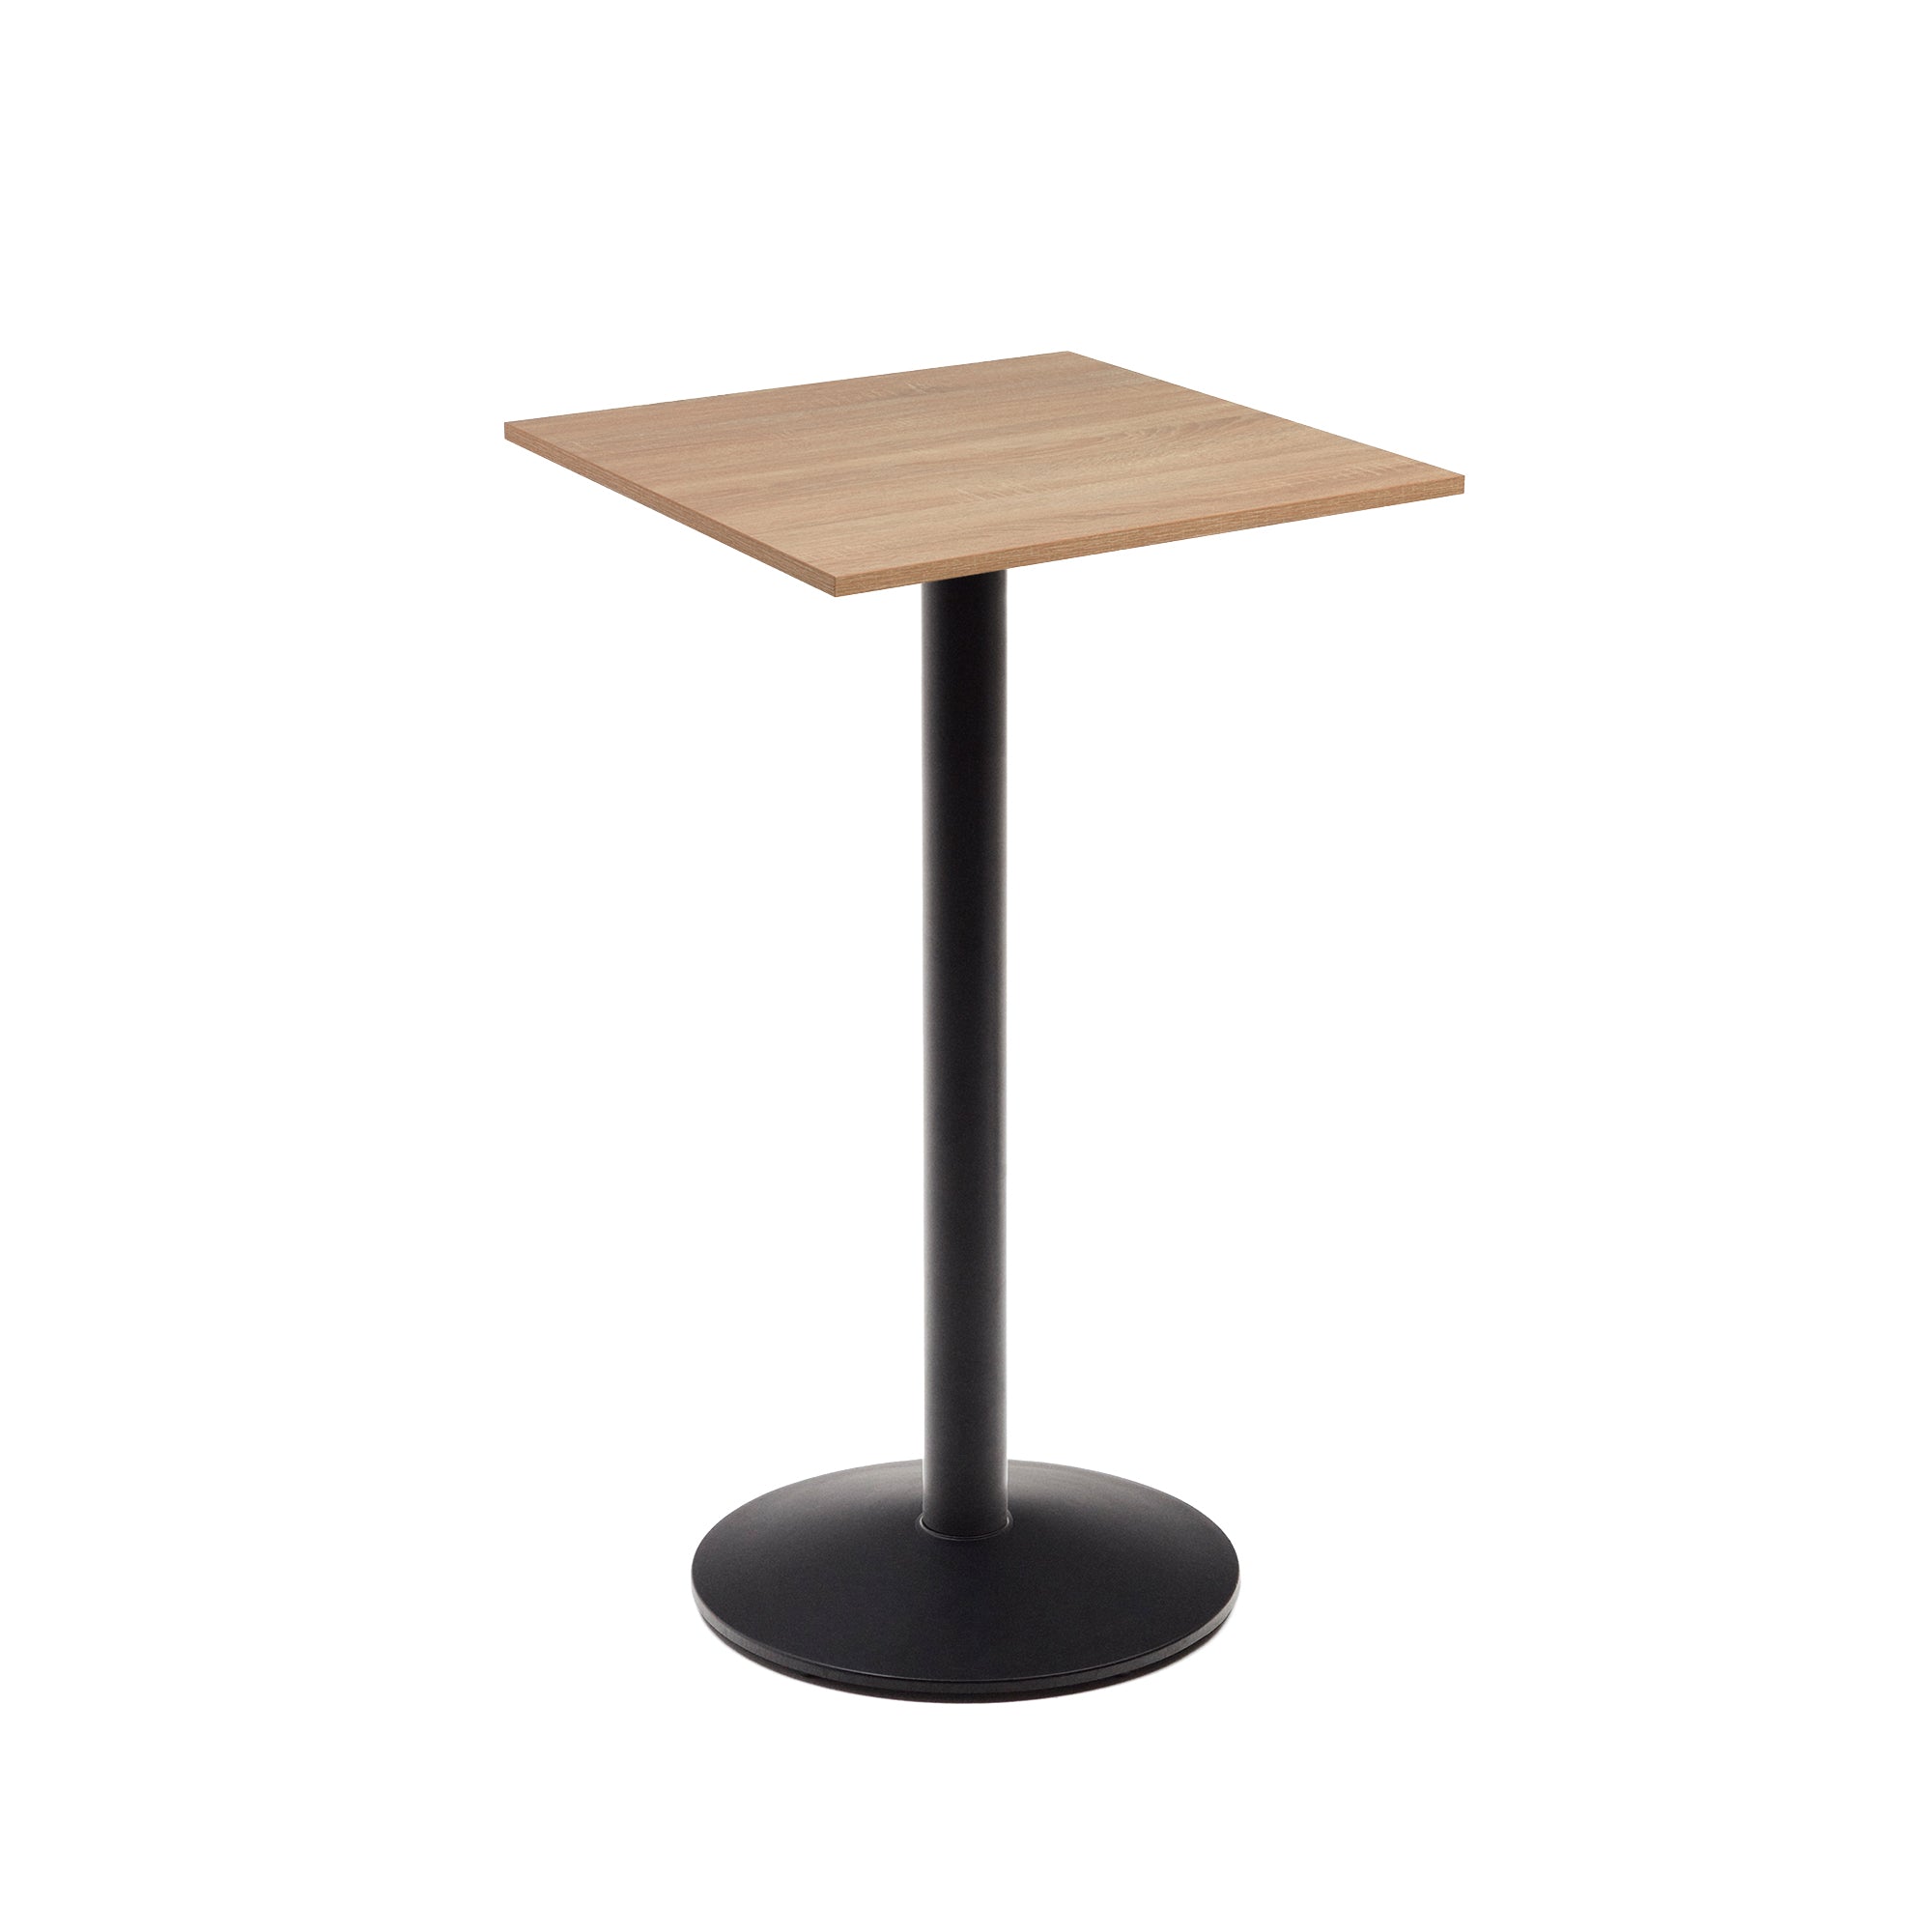 Esilda high table in natural finish melamine with metal leg in a painted black finish, 60x60x96cm